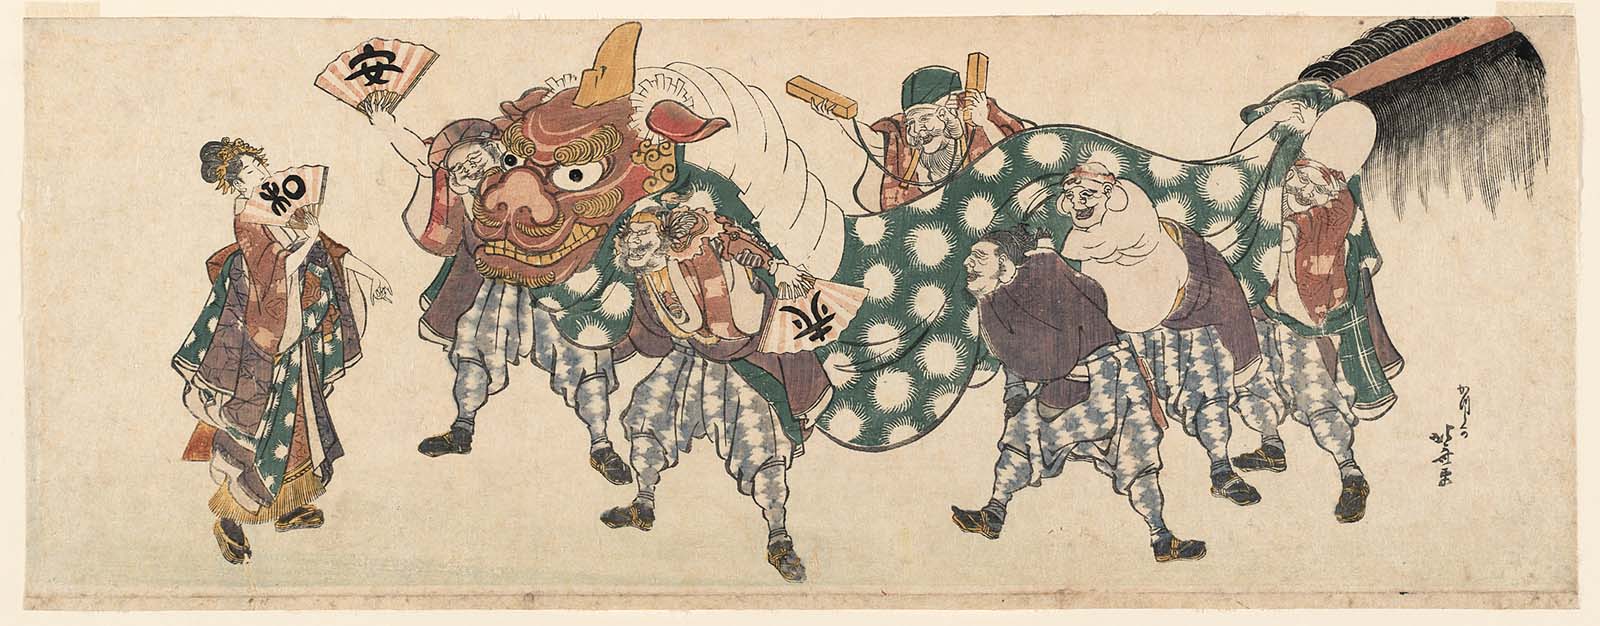 Hokusai - The Seven Gods of Good Fortune in a Lion Dance - Long Surimono